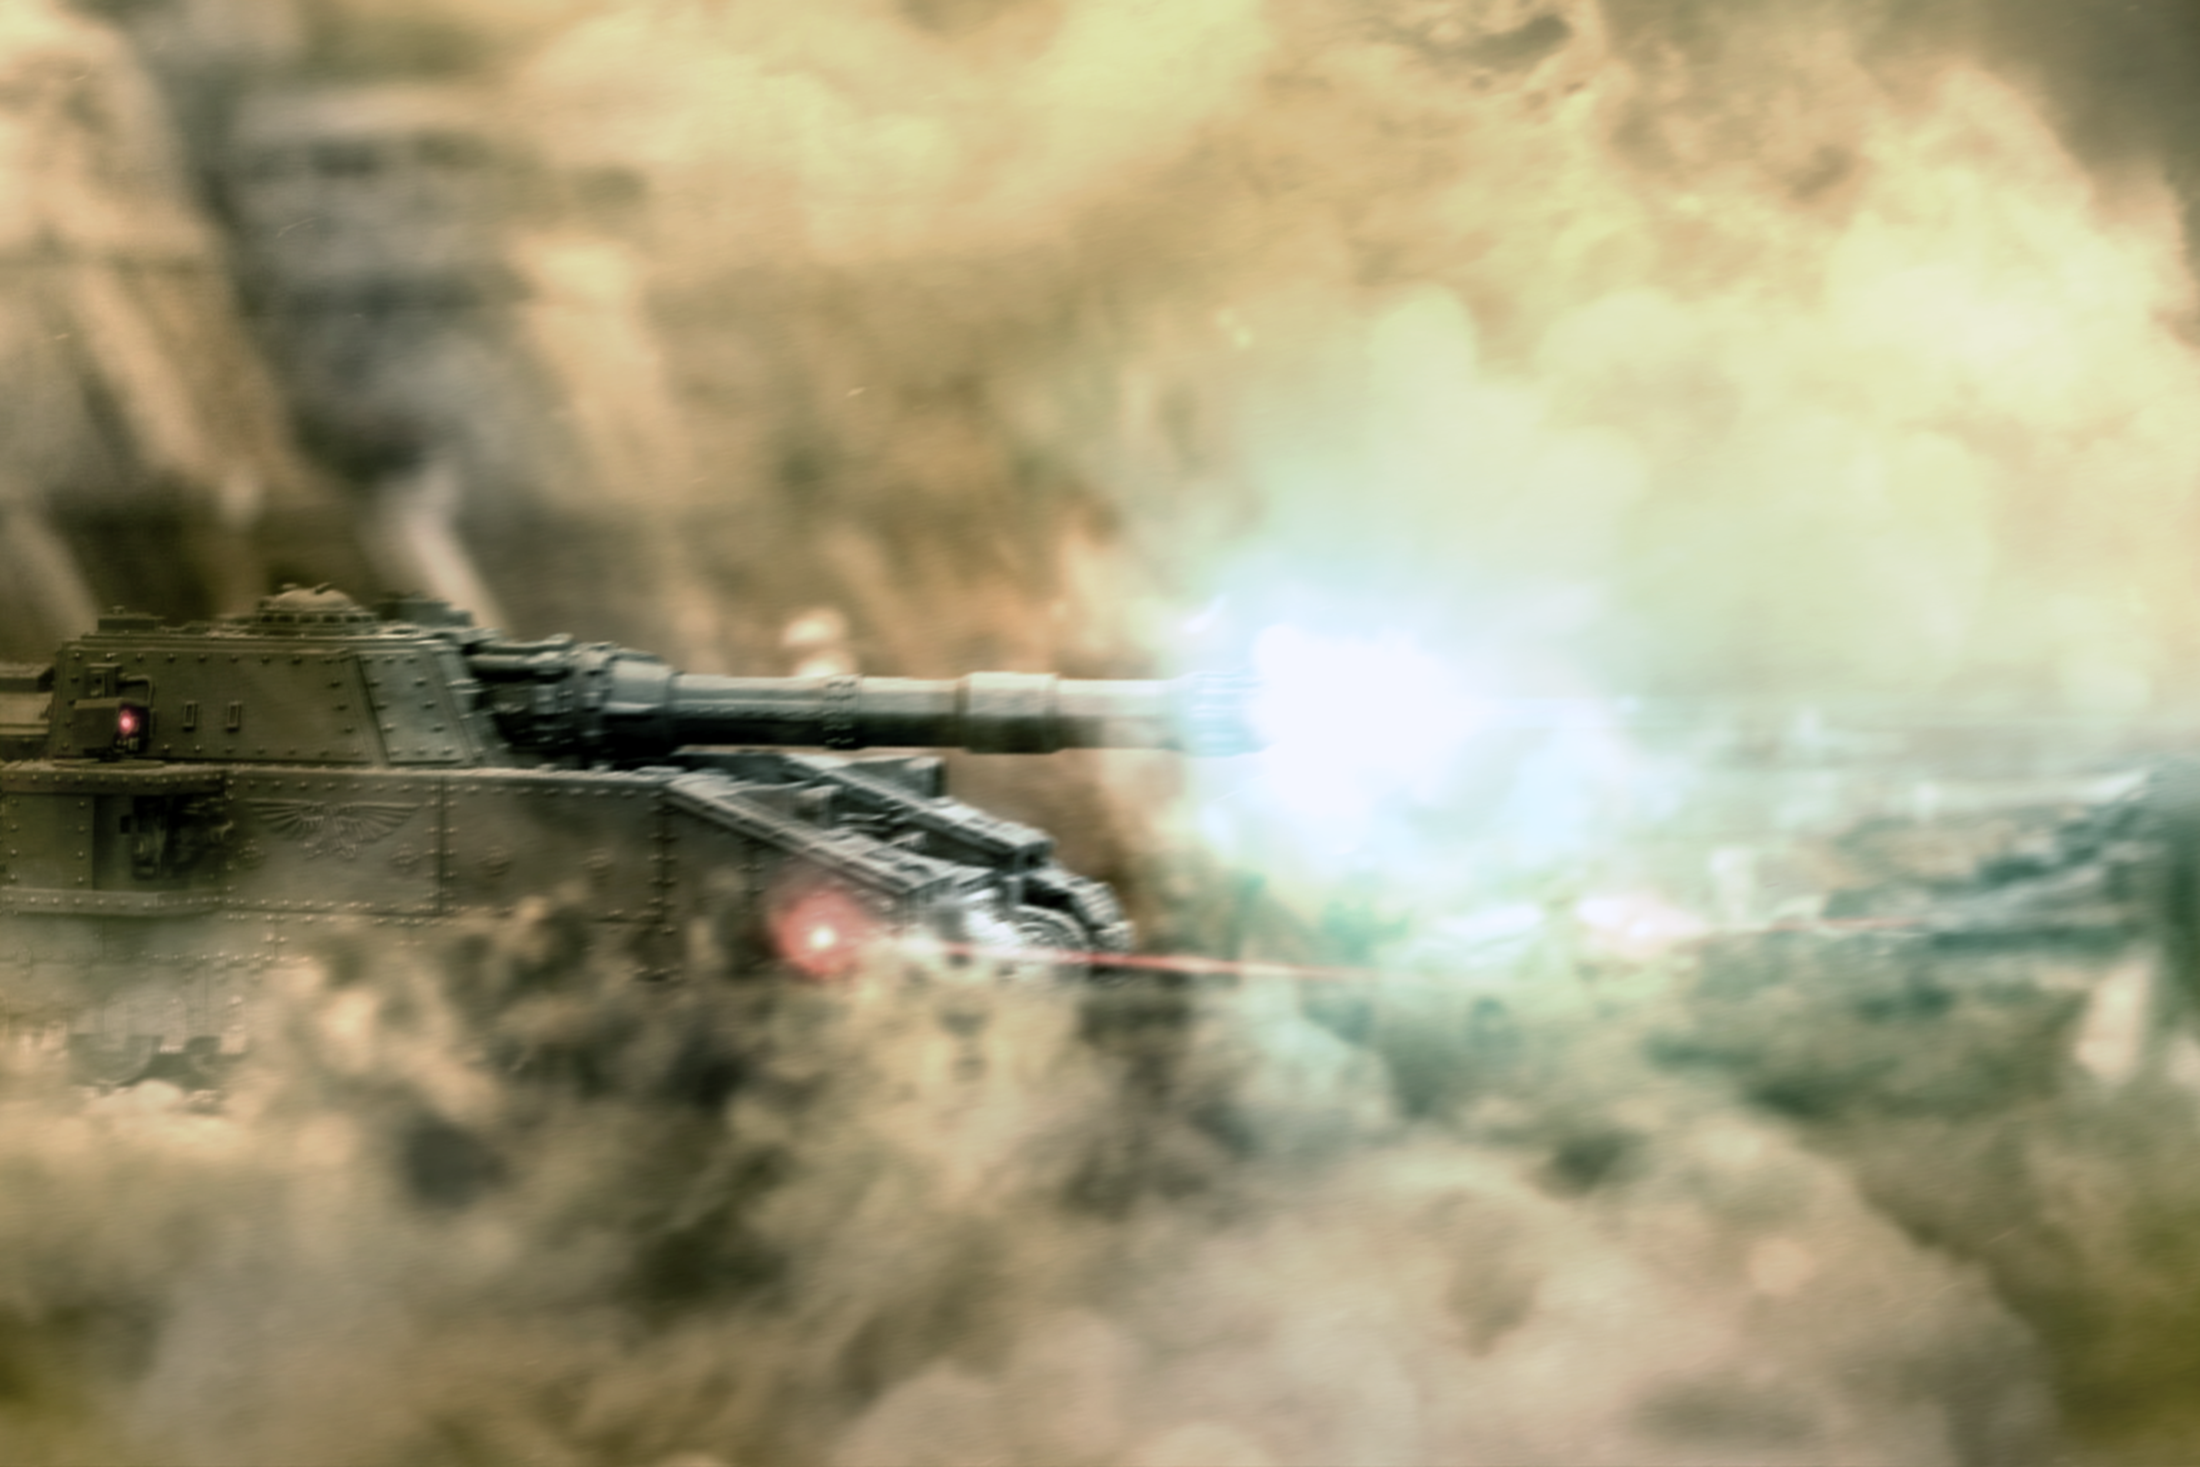 General 2200x1467 science fiction tank vehicle military artwork